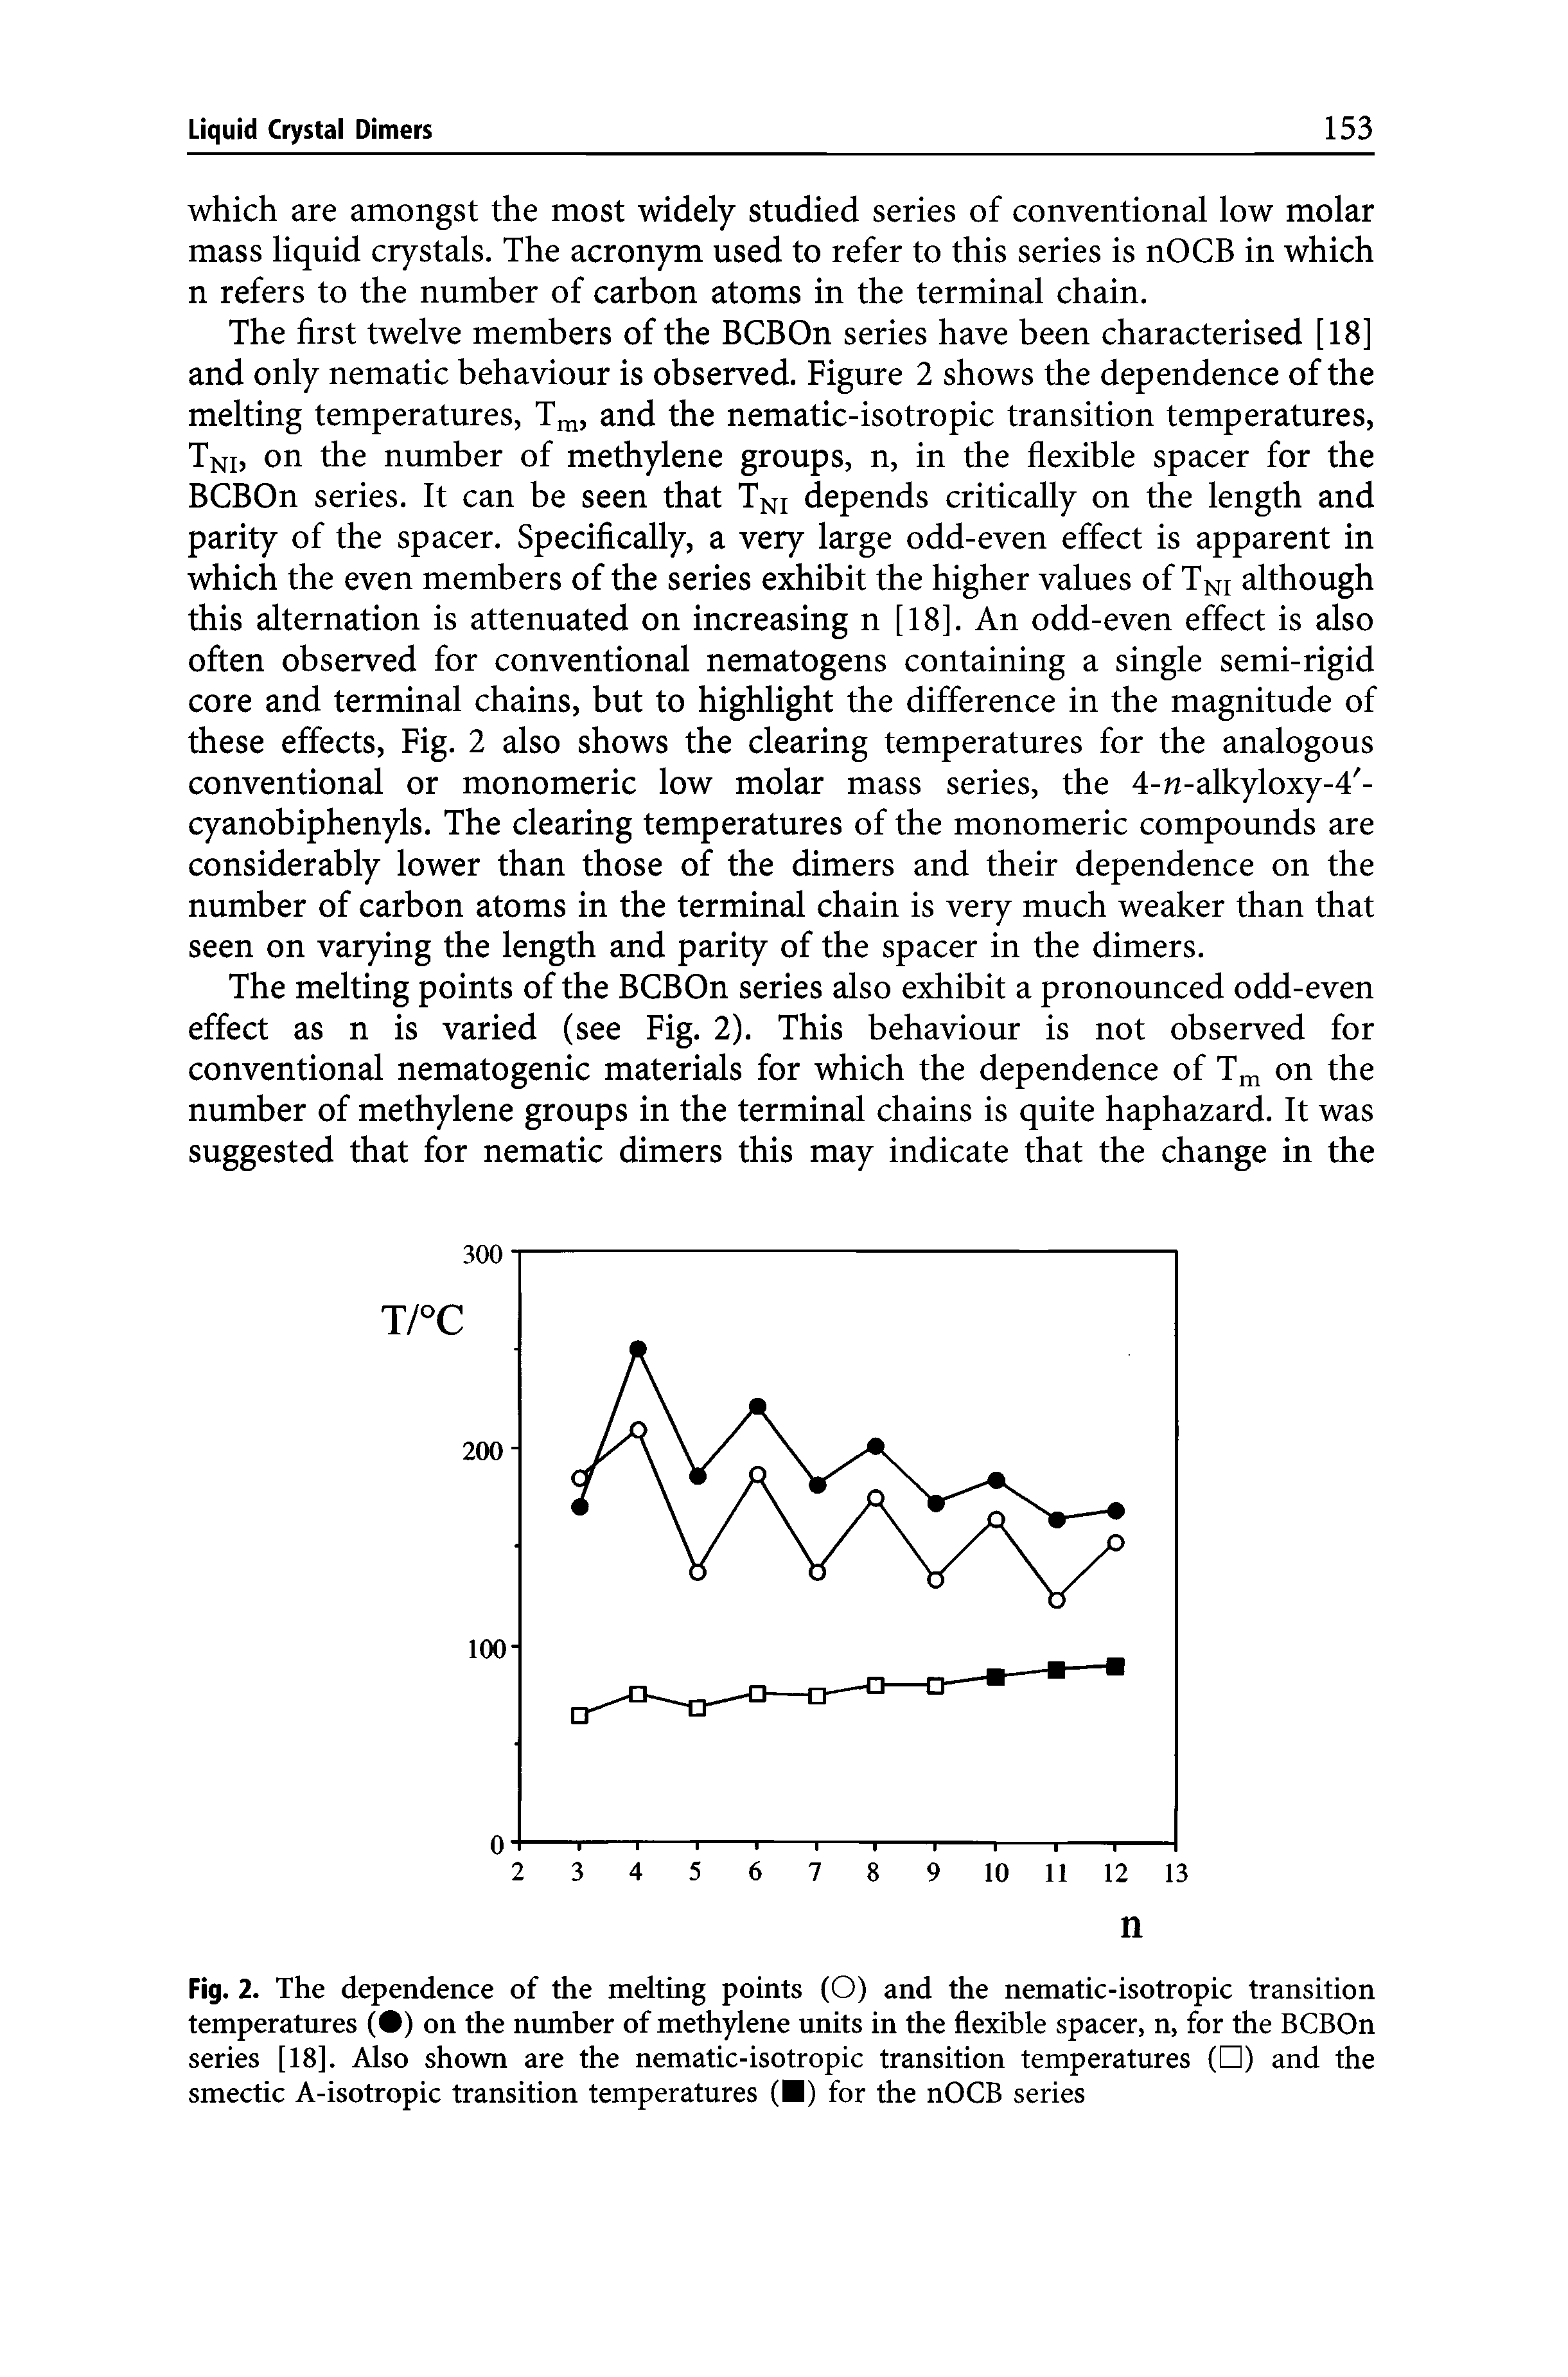 Fig. 2. The dependence of the melting points (O) and the nematic-isotropic transition temperatures ( ) on the nmnher of methylene units in the flexible spacer, n, for the BCBOn series [18]. Also shown are the nematic-isotropic transition temperatures ( ) and the smectic A-isotropic transition temperatures ( ) for the nOCB series...